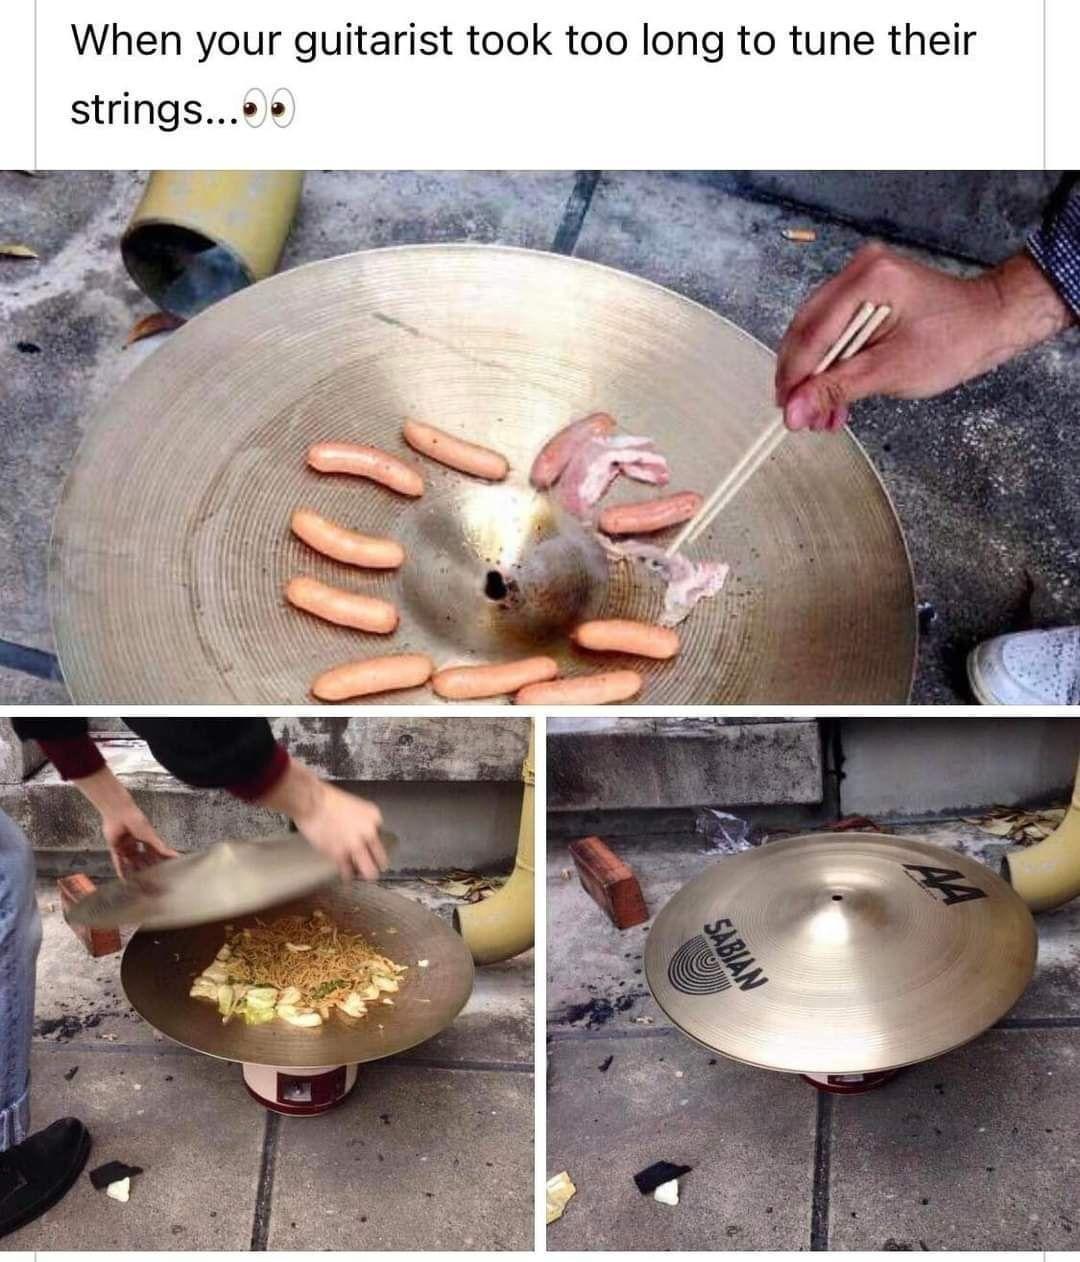 funny memes pics and tweets - cookware and bakeware - When your guitarist took too long to tune their strings.... 6 Sabian